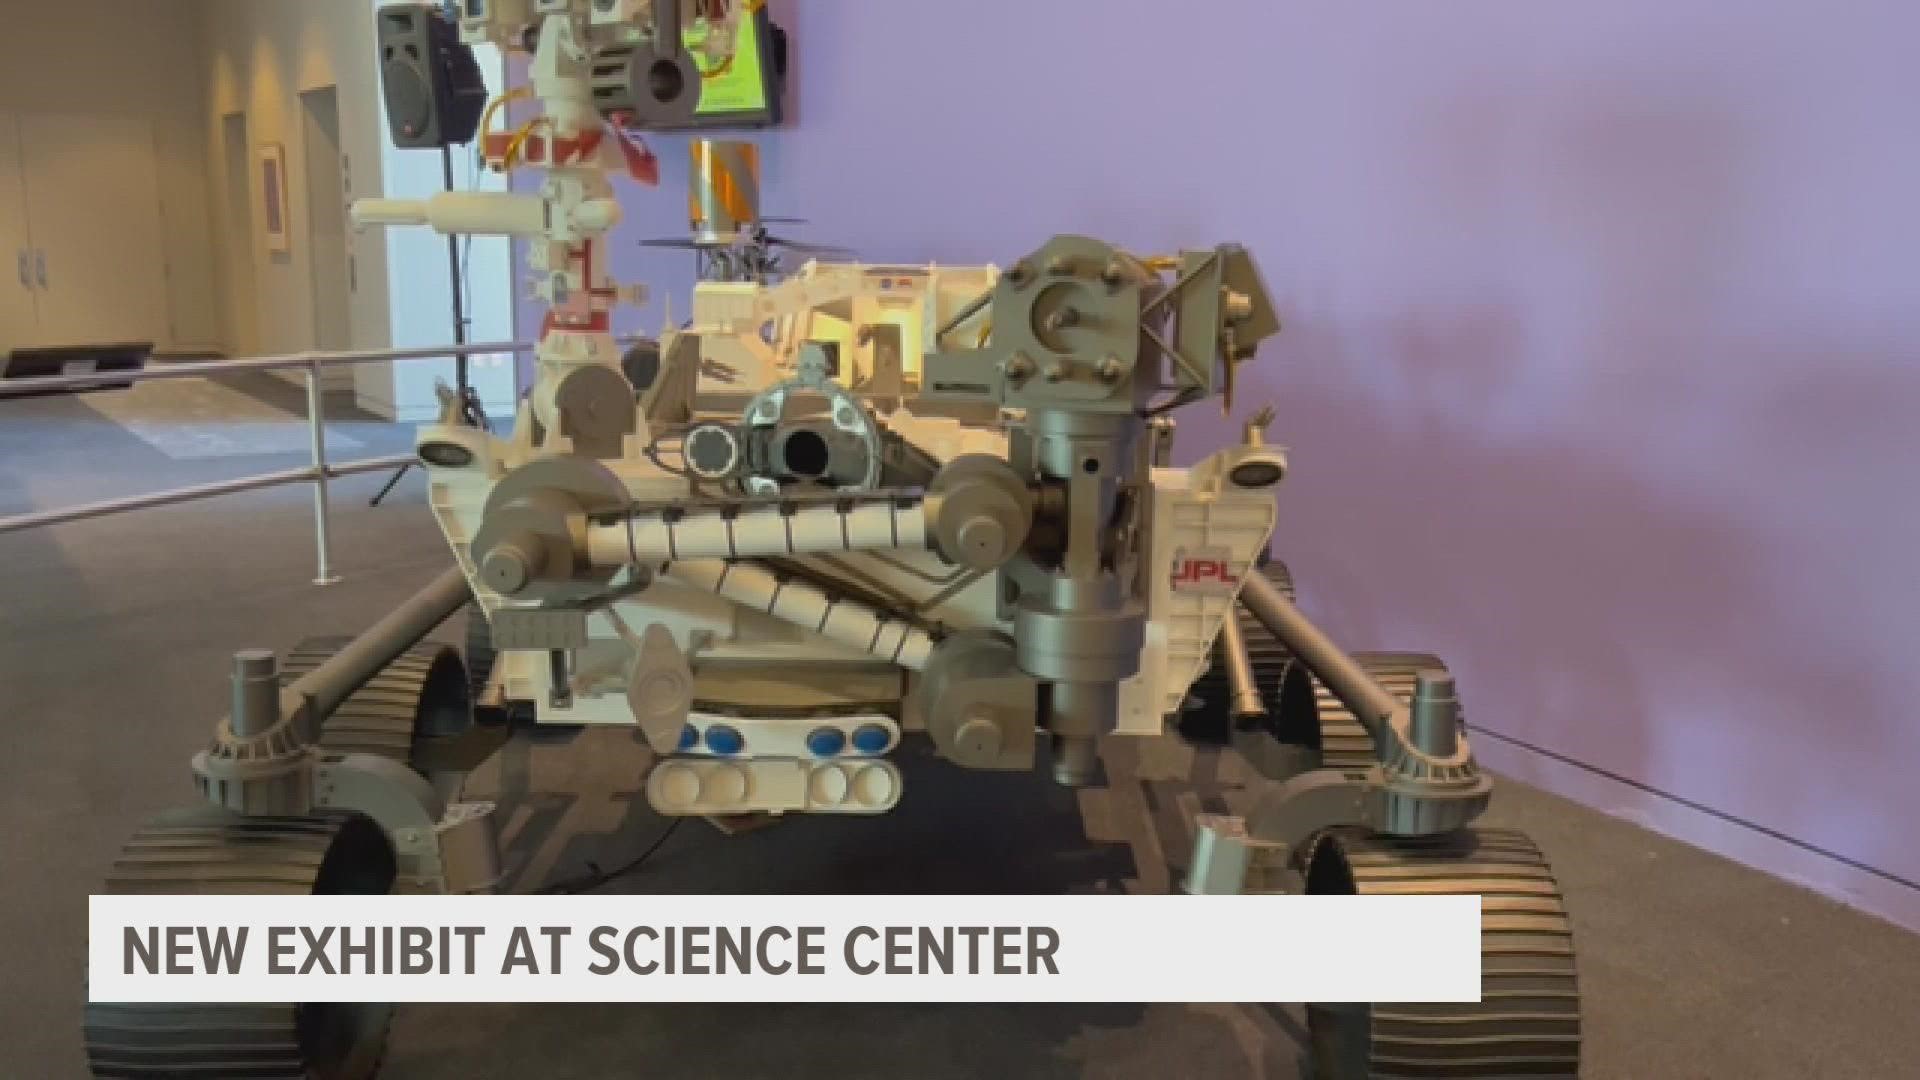 The Science Center is temporarily home to a replica of the Perseverance Rover and Ingenuity Mars helicopter.